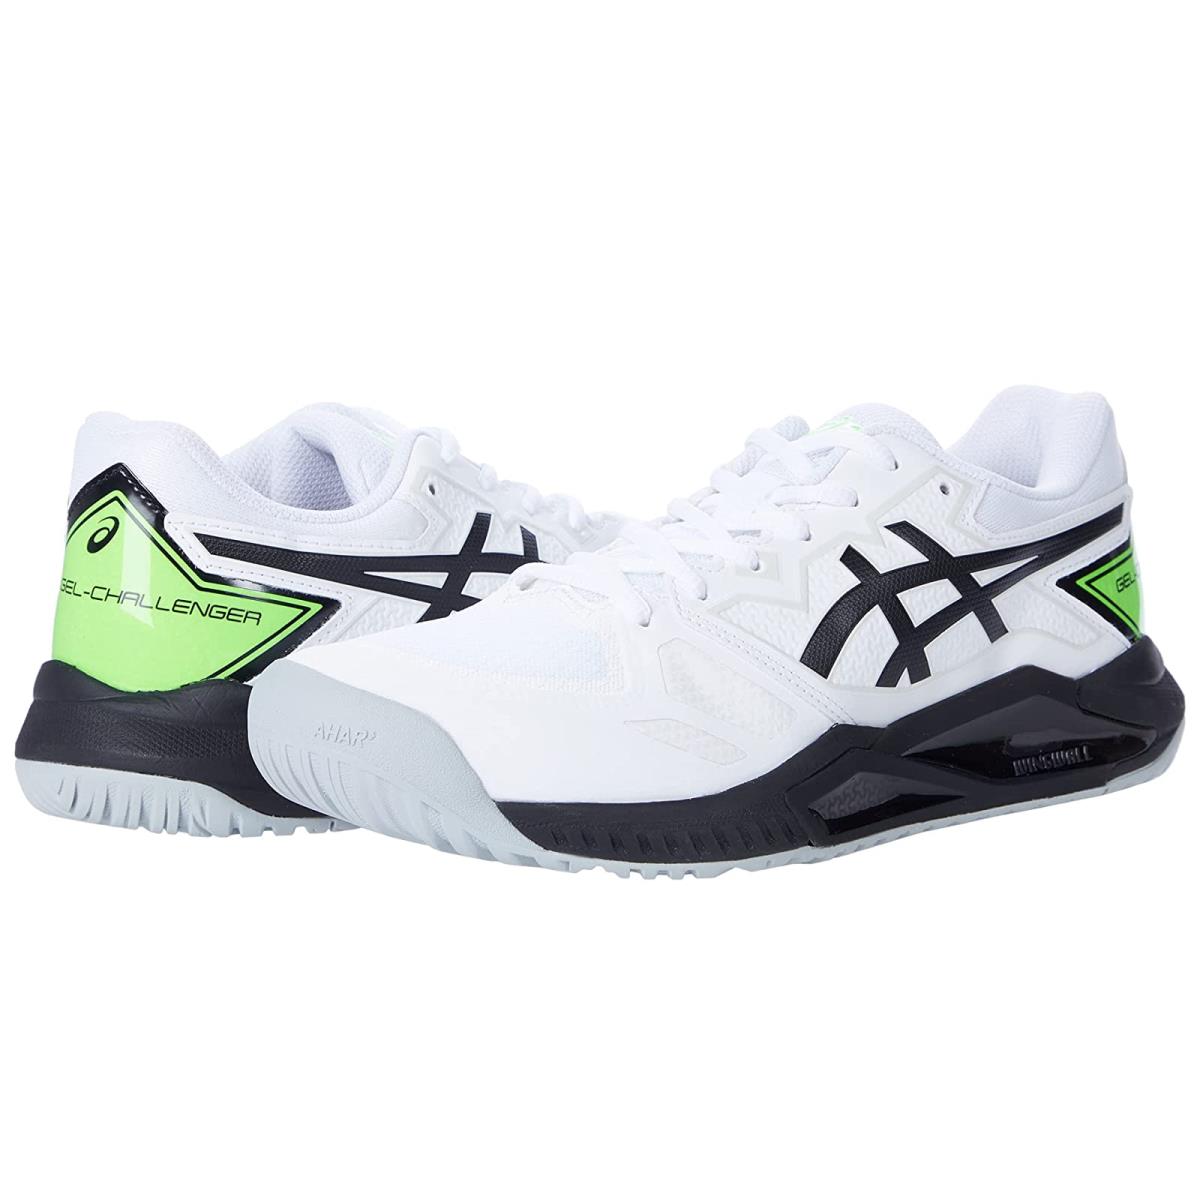 Man`s Sneakers Athletic Shoes Asics Gel-challenger 13 White/Green Gecko